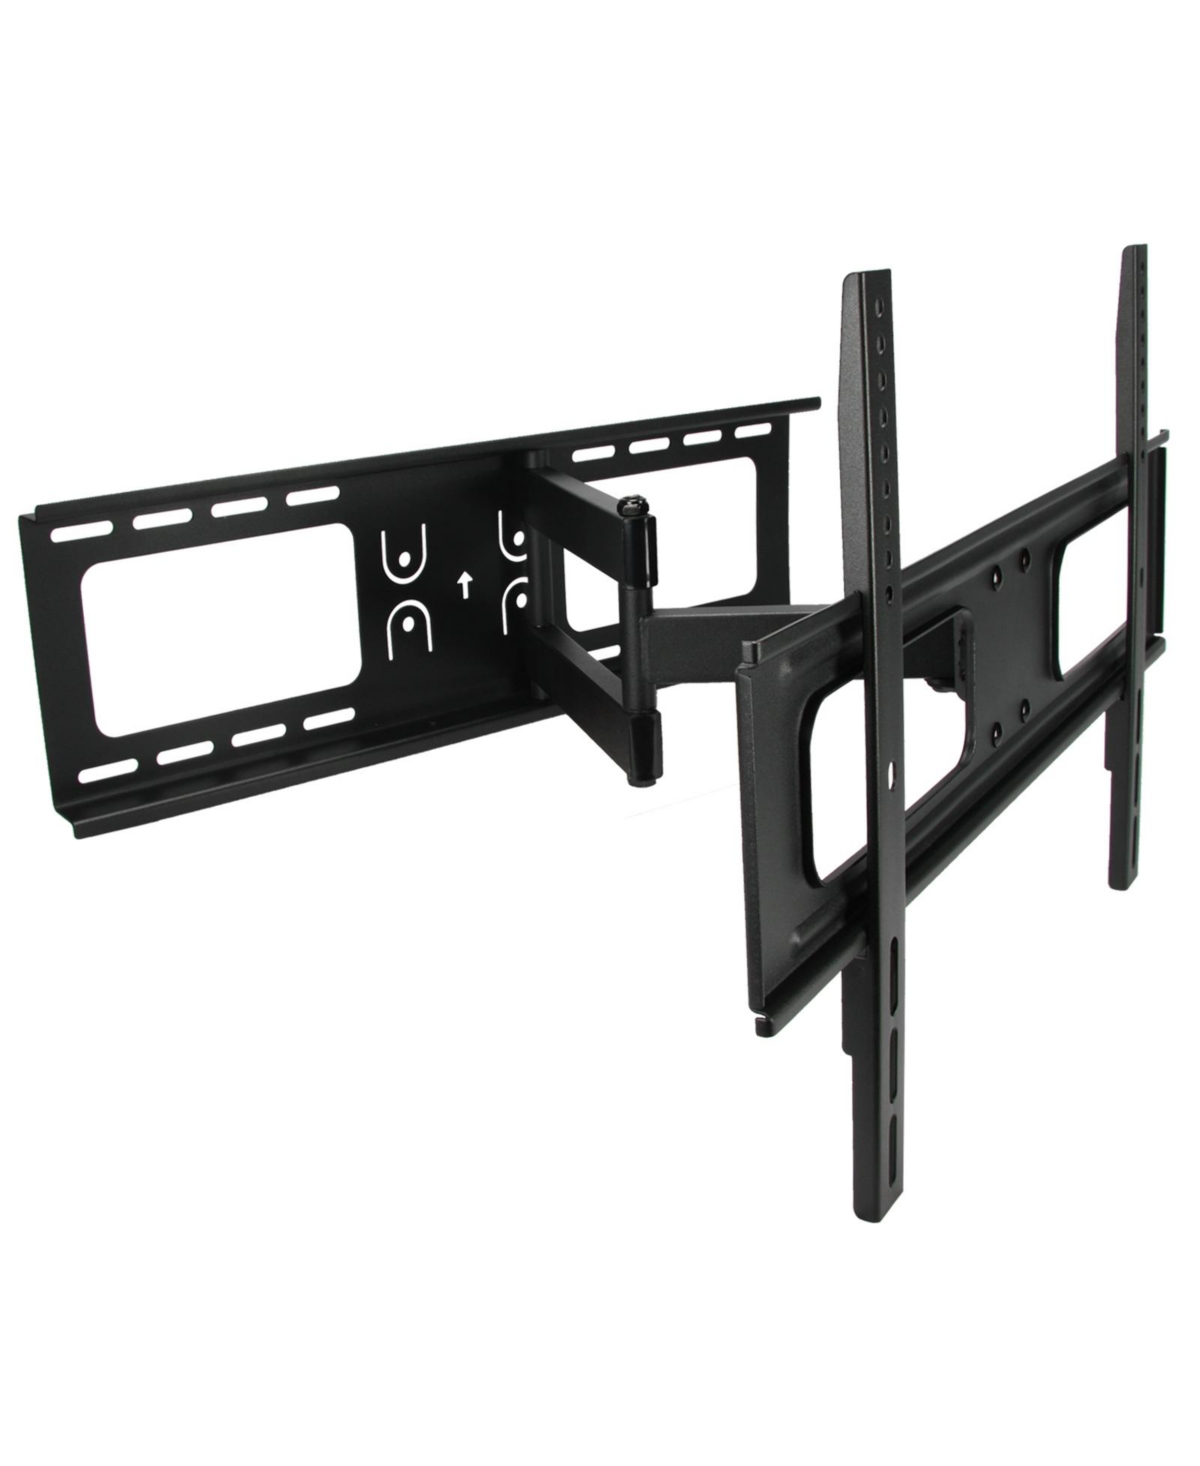 Full Motion Wall Mount for 32-70 Inch Displays - Black